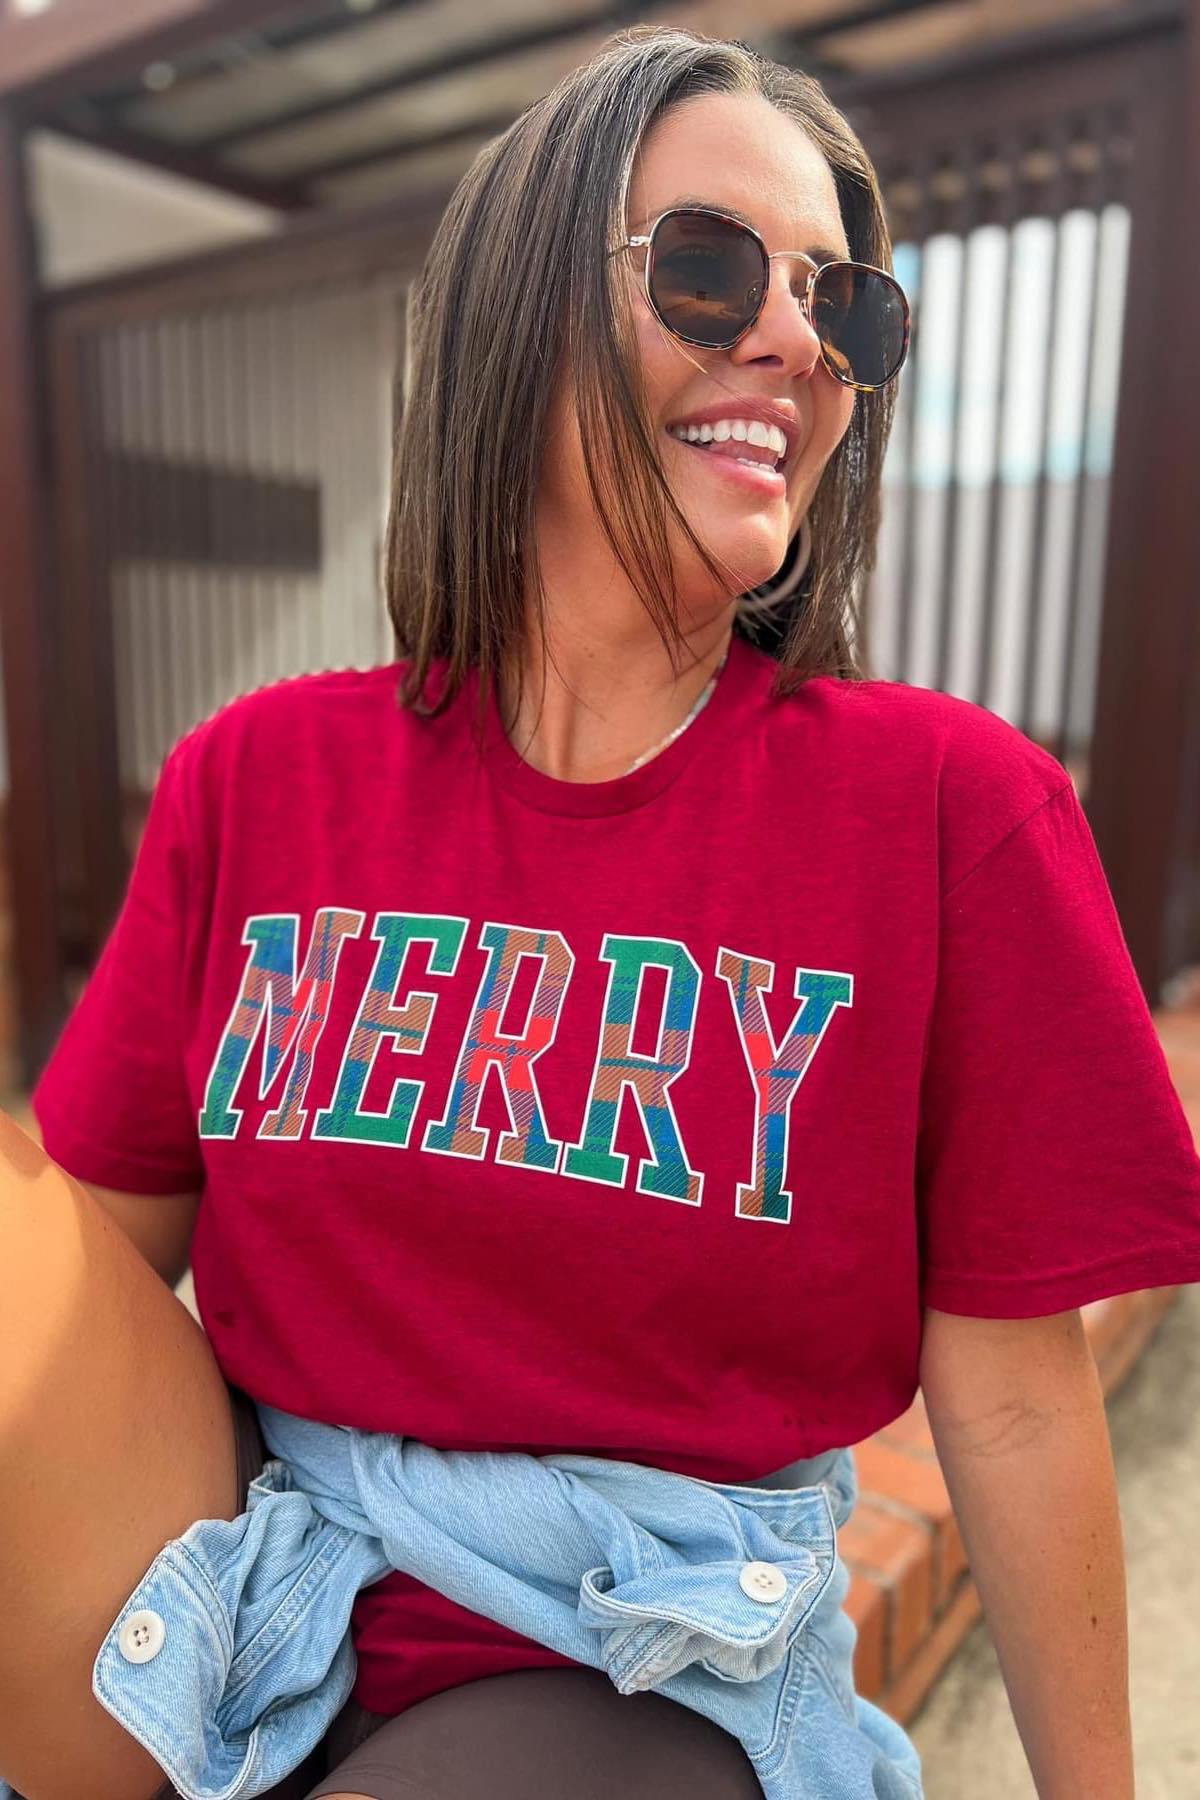 [Bring on the Merry] Tee Shirt